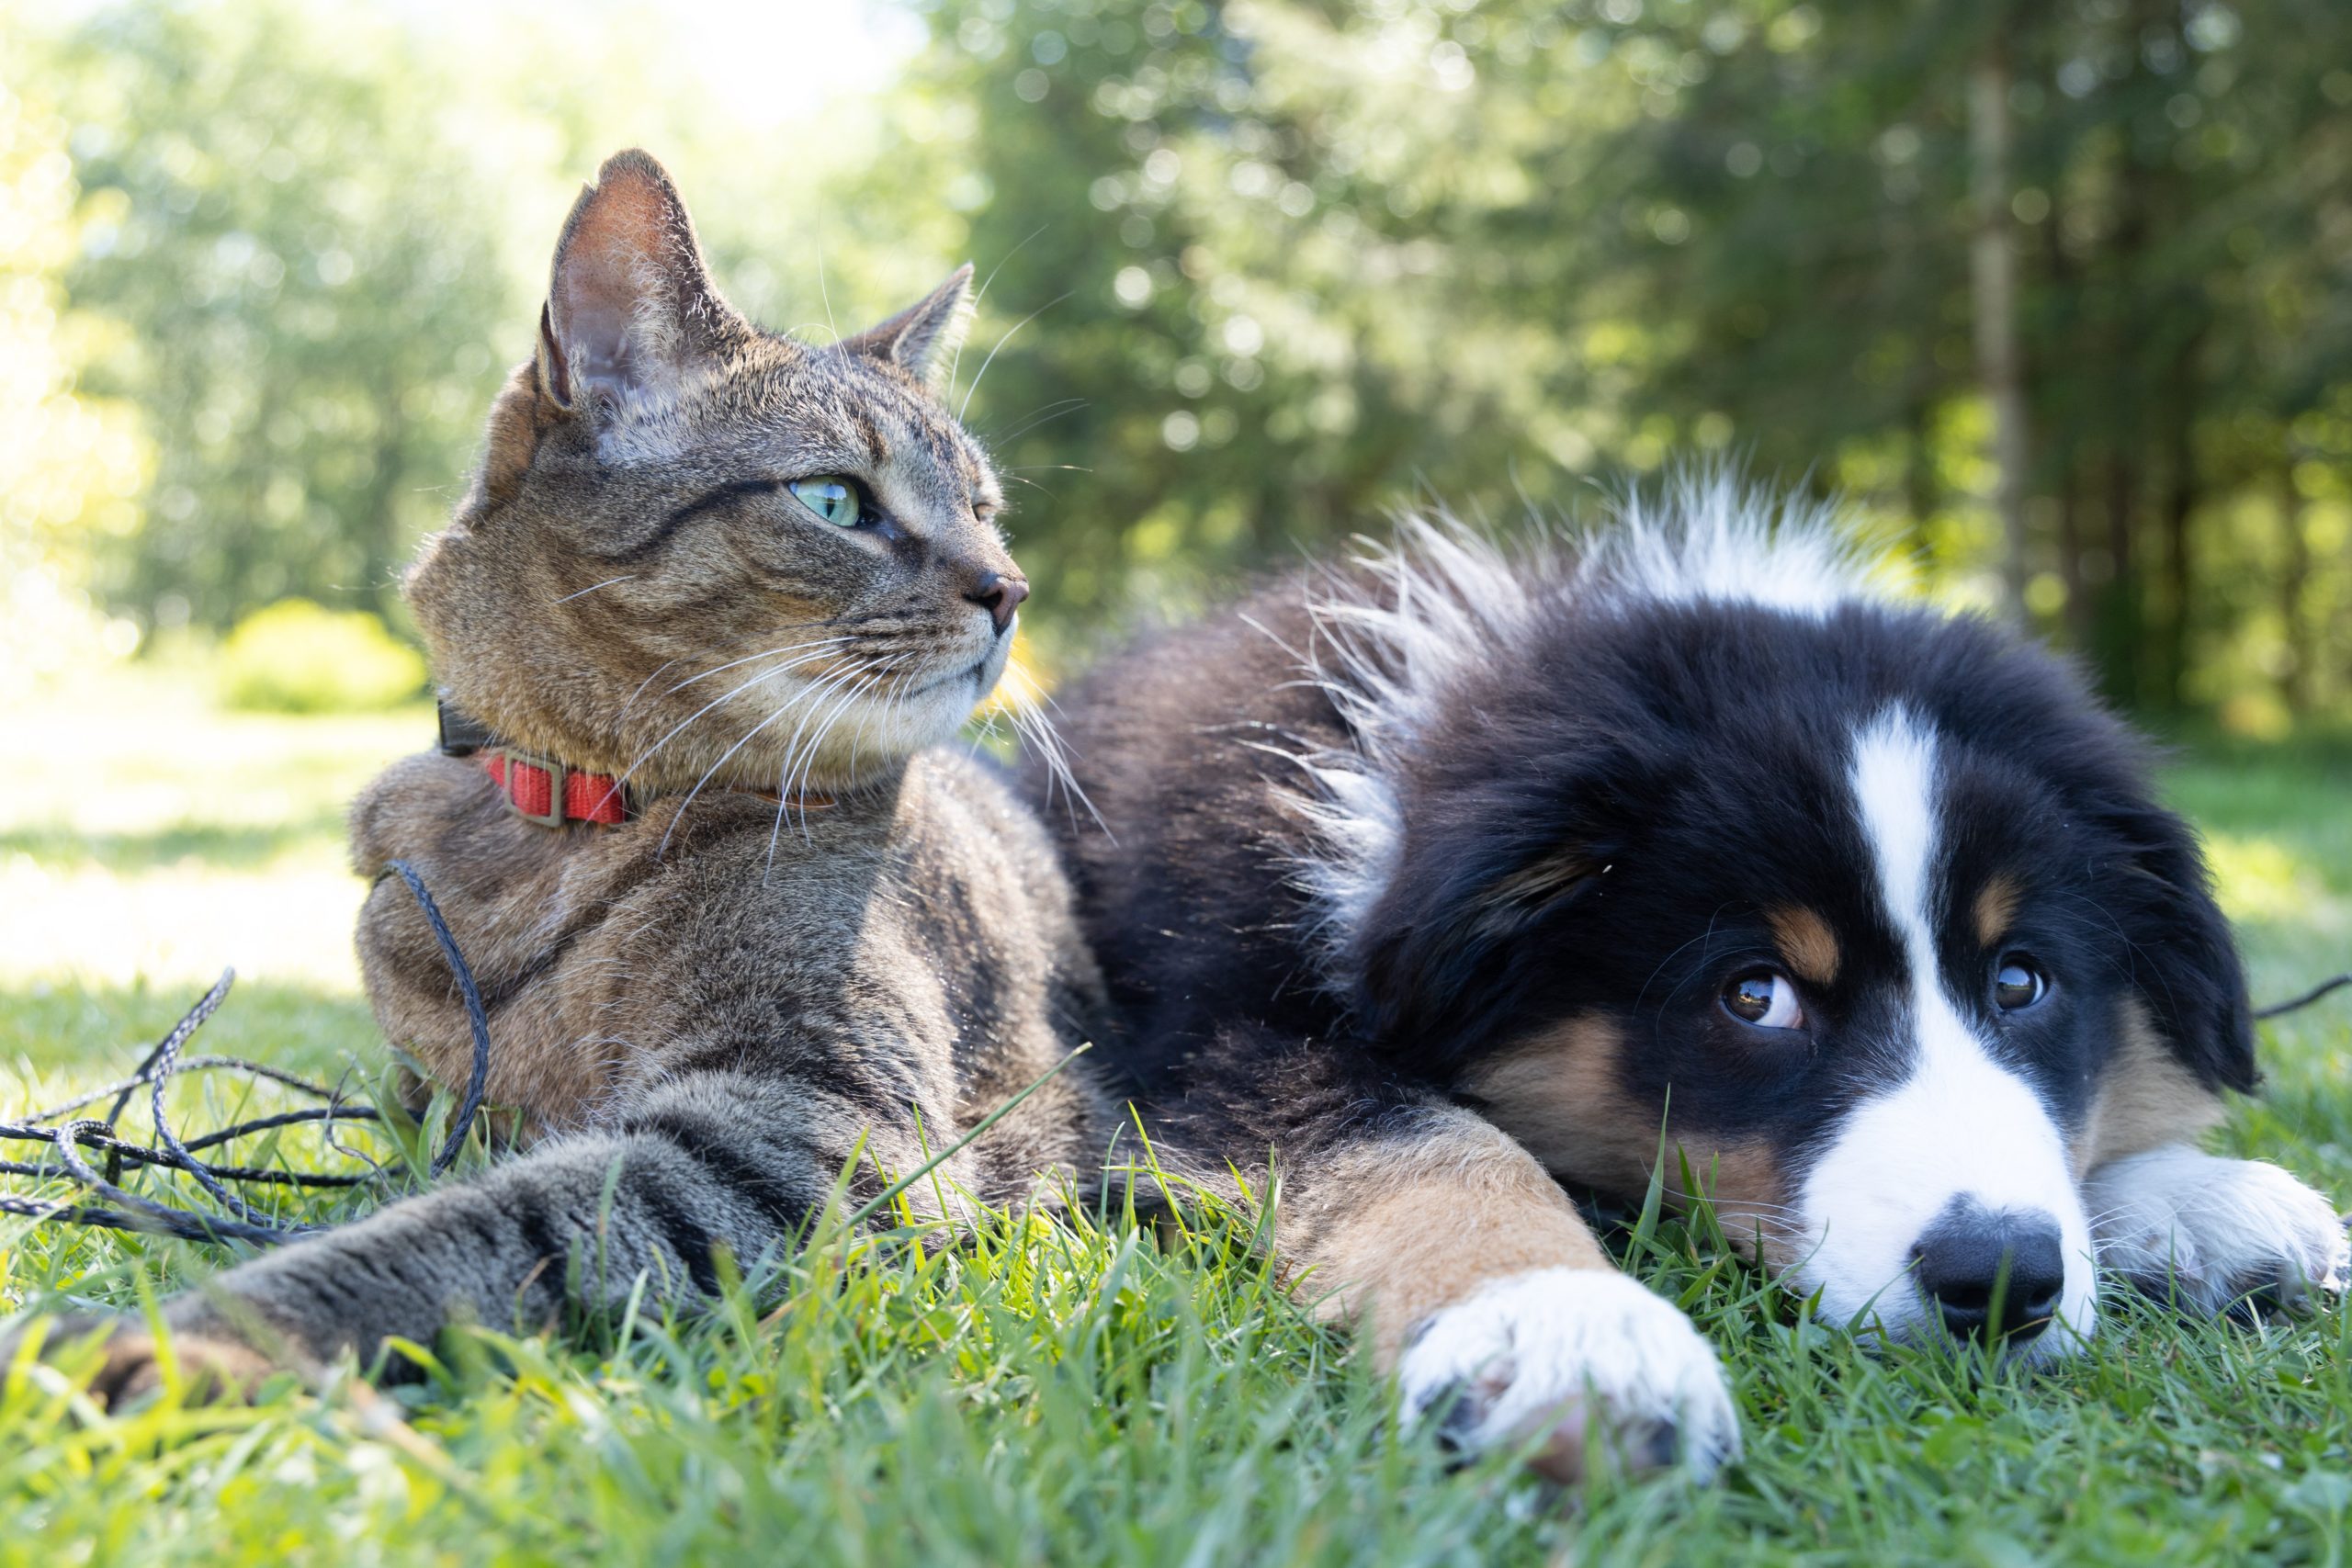 cat and dog laying in grass together